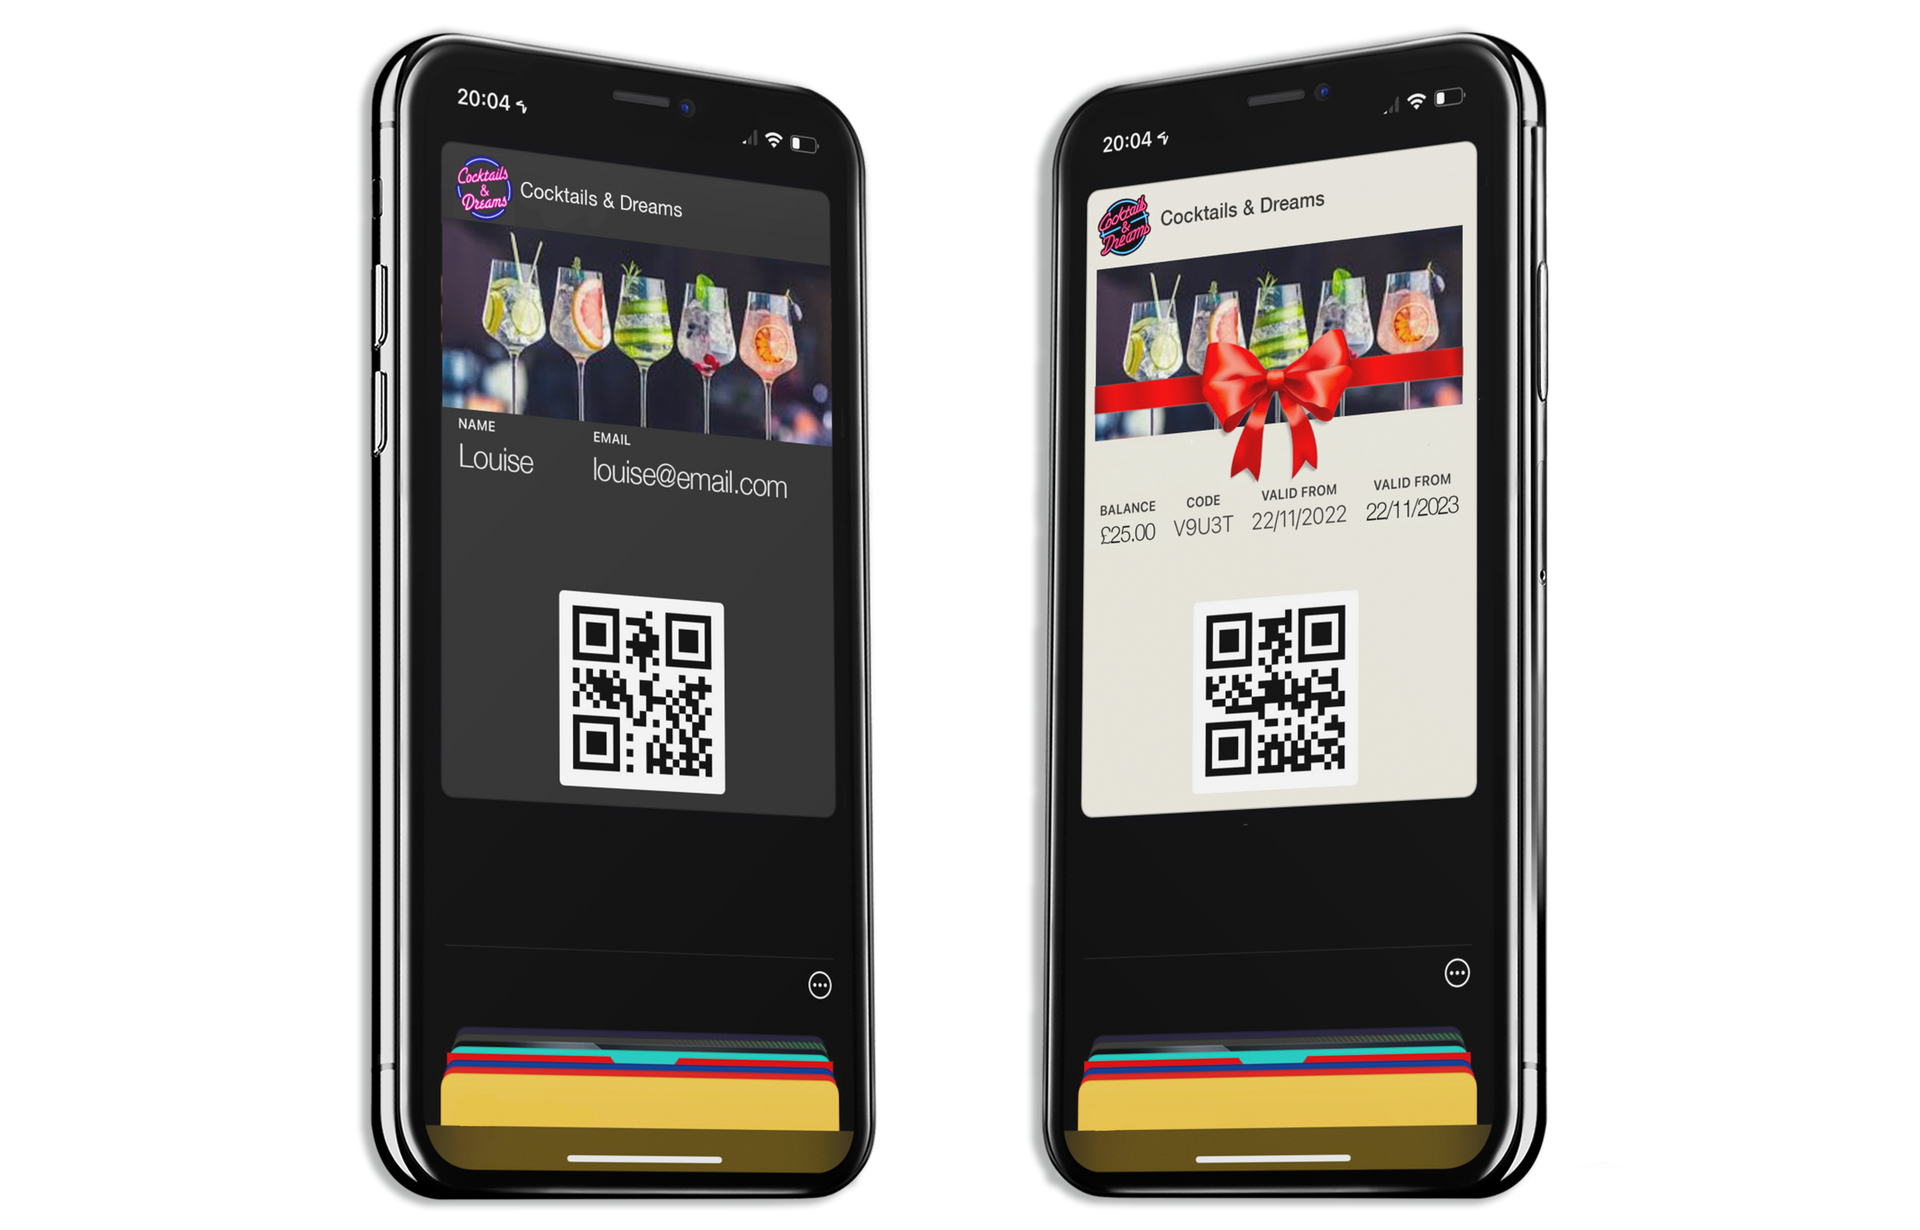 Member pass & gift card in Apple Wallet